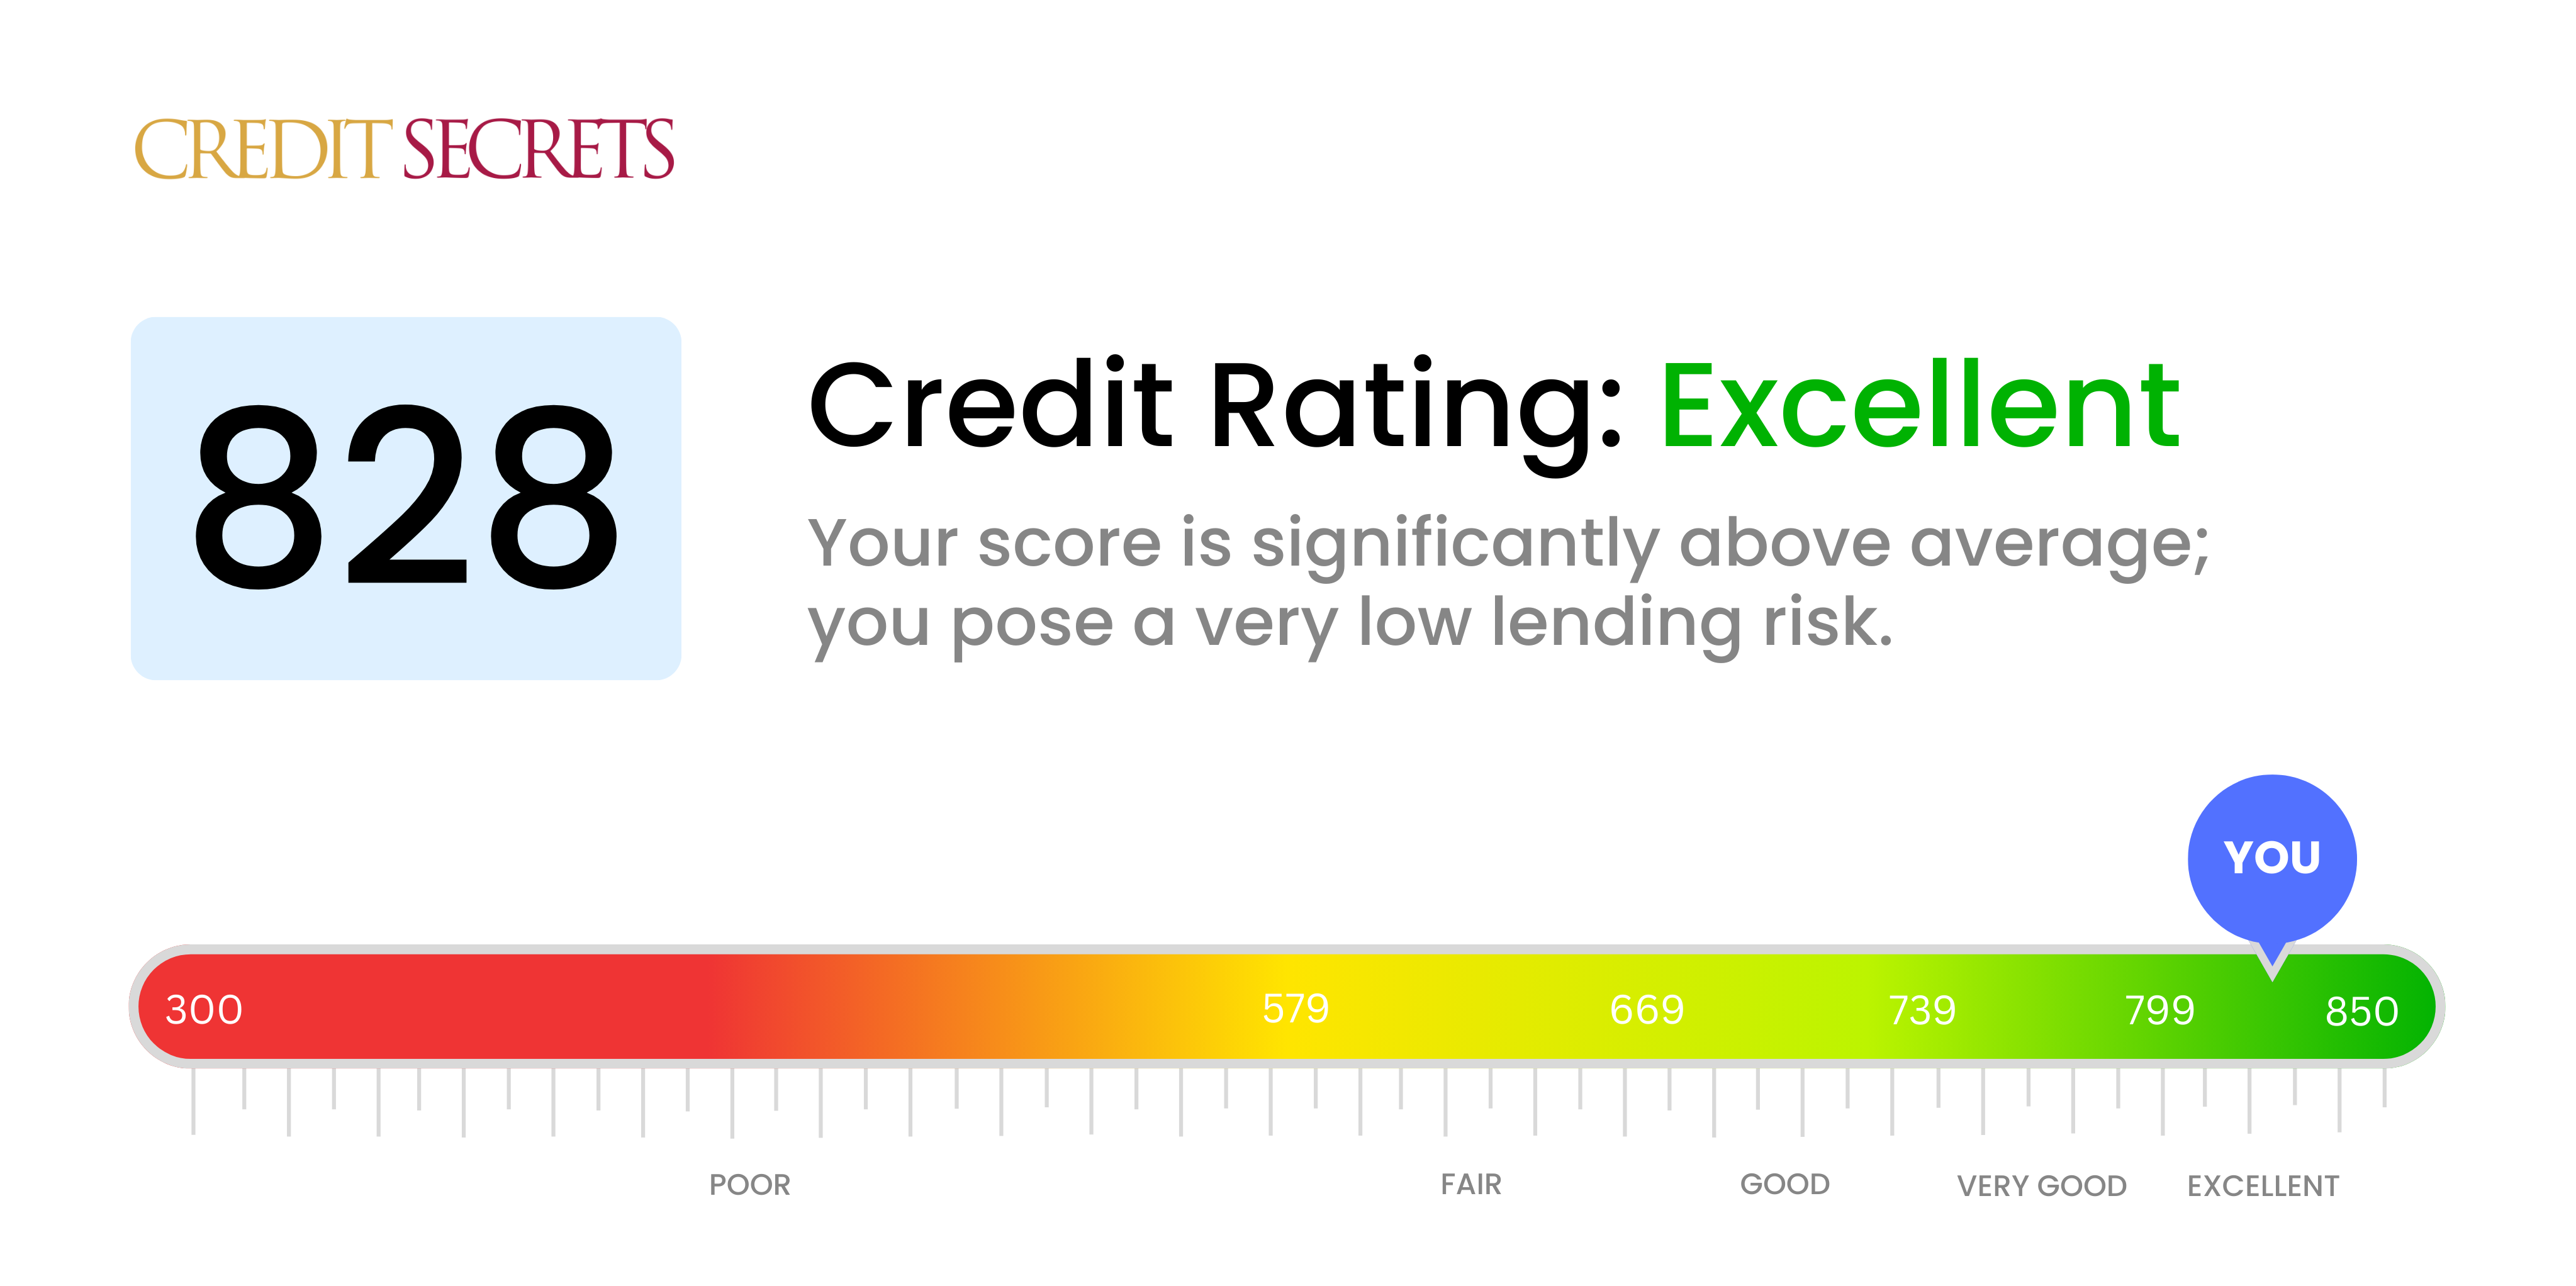 Is 828 a good credit score?